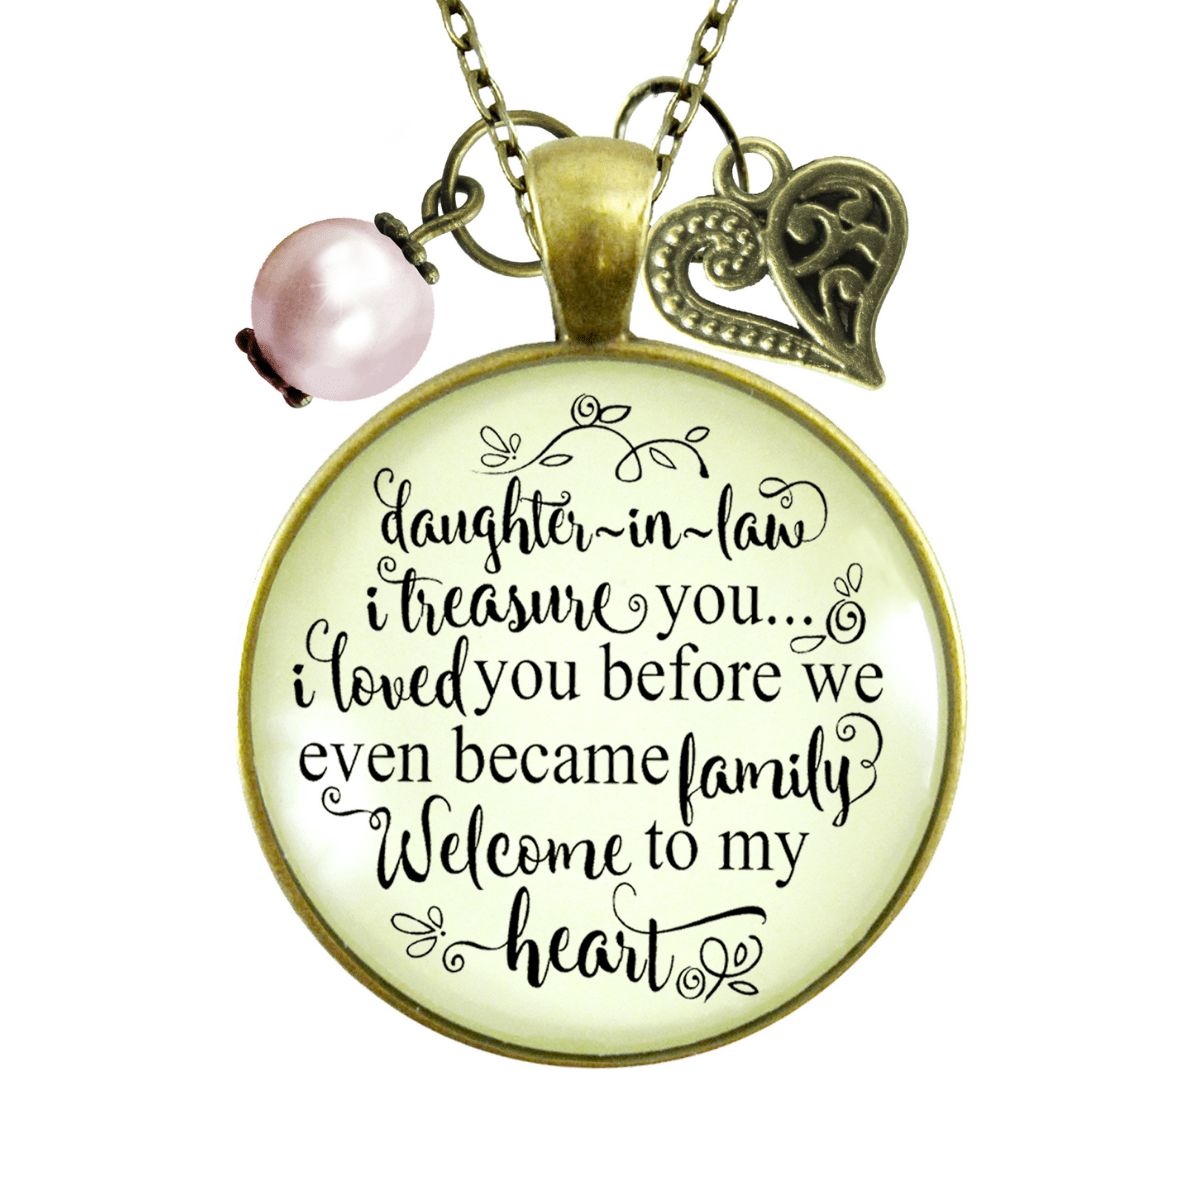 Gutsy Goodness Daughter in Law Necklace Treasure You Family Welcome Meaningful Jewelry - Gutsy Goodness;Daughter In Law Necklace Treasure You Family Welcome Meaningful Jewelry - Gutsy Goodness Handmade Jewelry Gifts